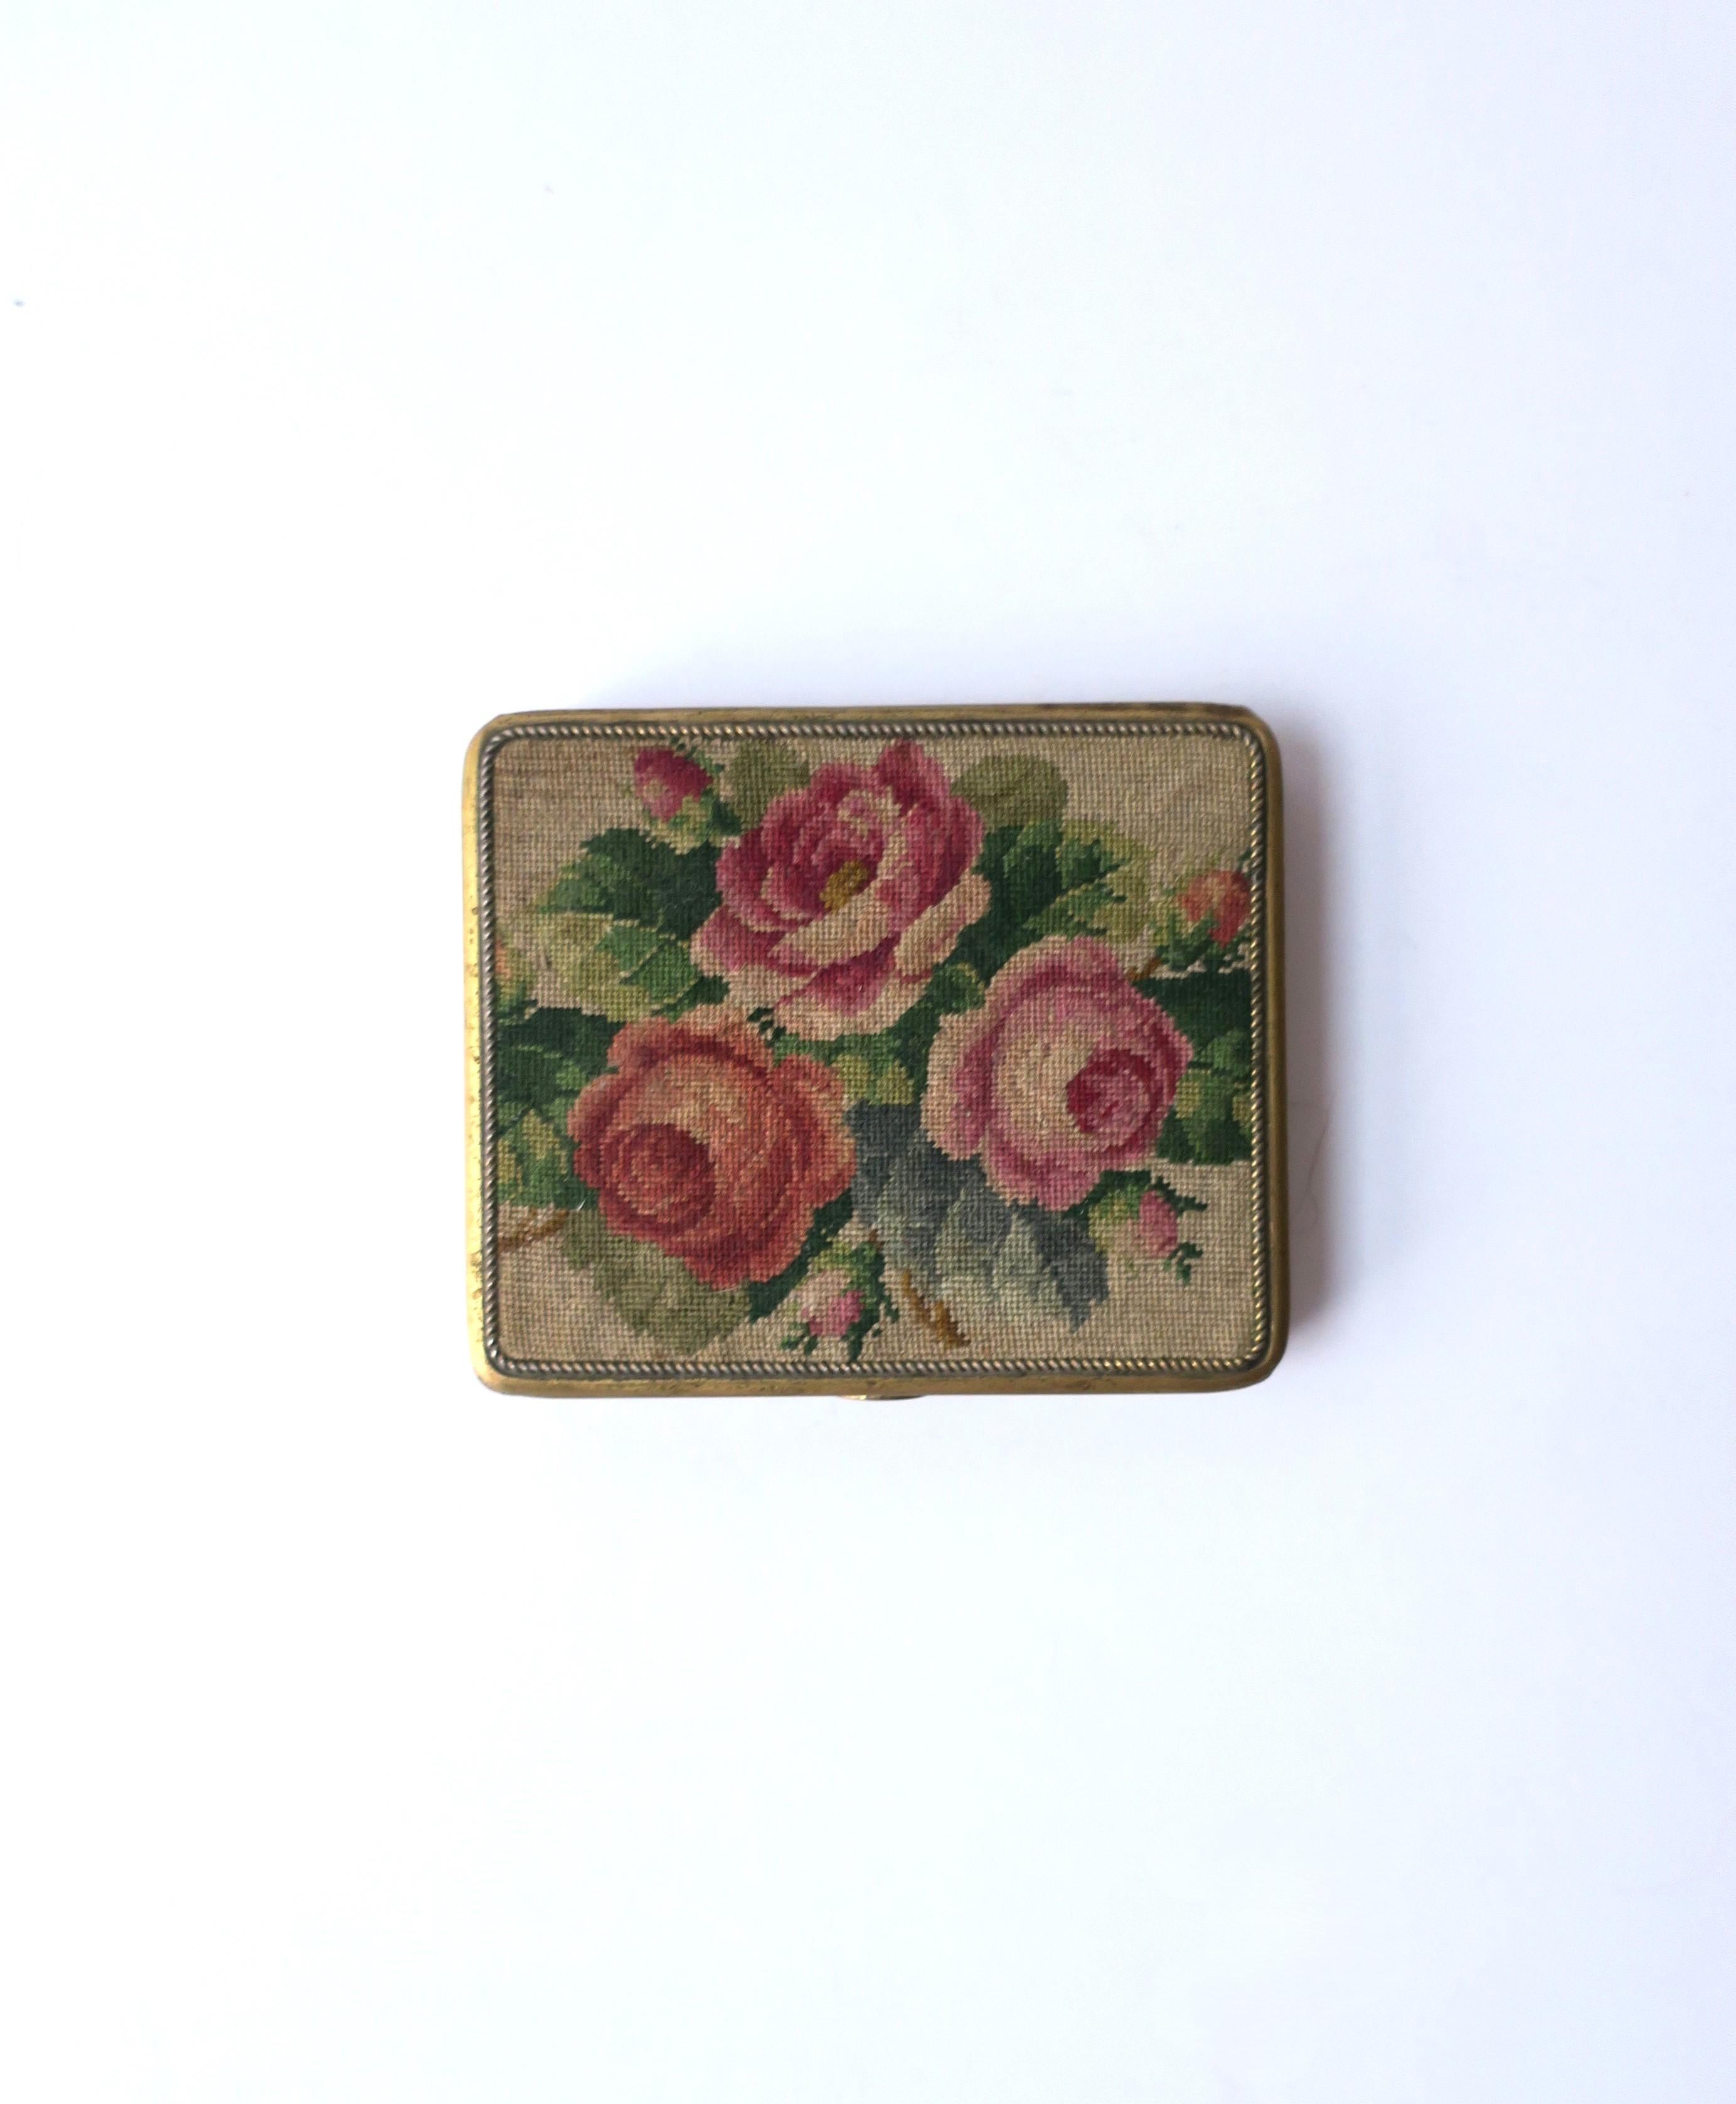 A beautiful petit needlepoint and enamel brass box with floral rose design, circa early-20th century. Lid has a beautiful petit needlepoint design of three roses, leaves and rose buds, on a neutral enamel over brass box. Marked inside box, 'Genuine